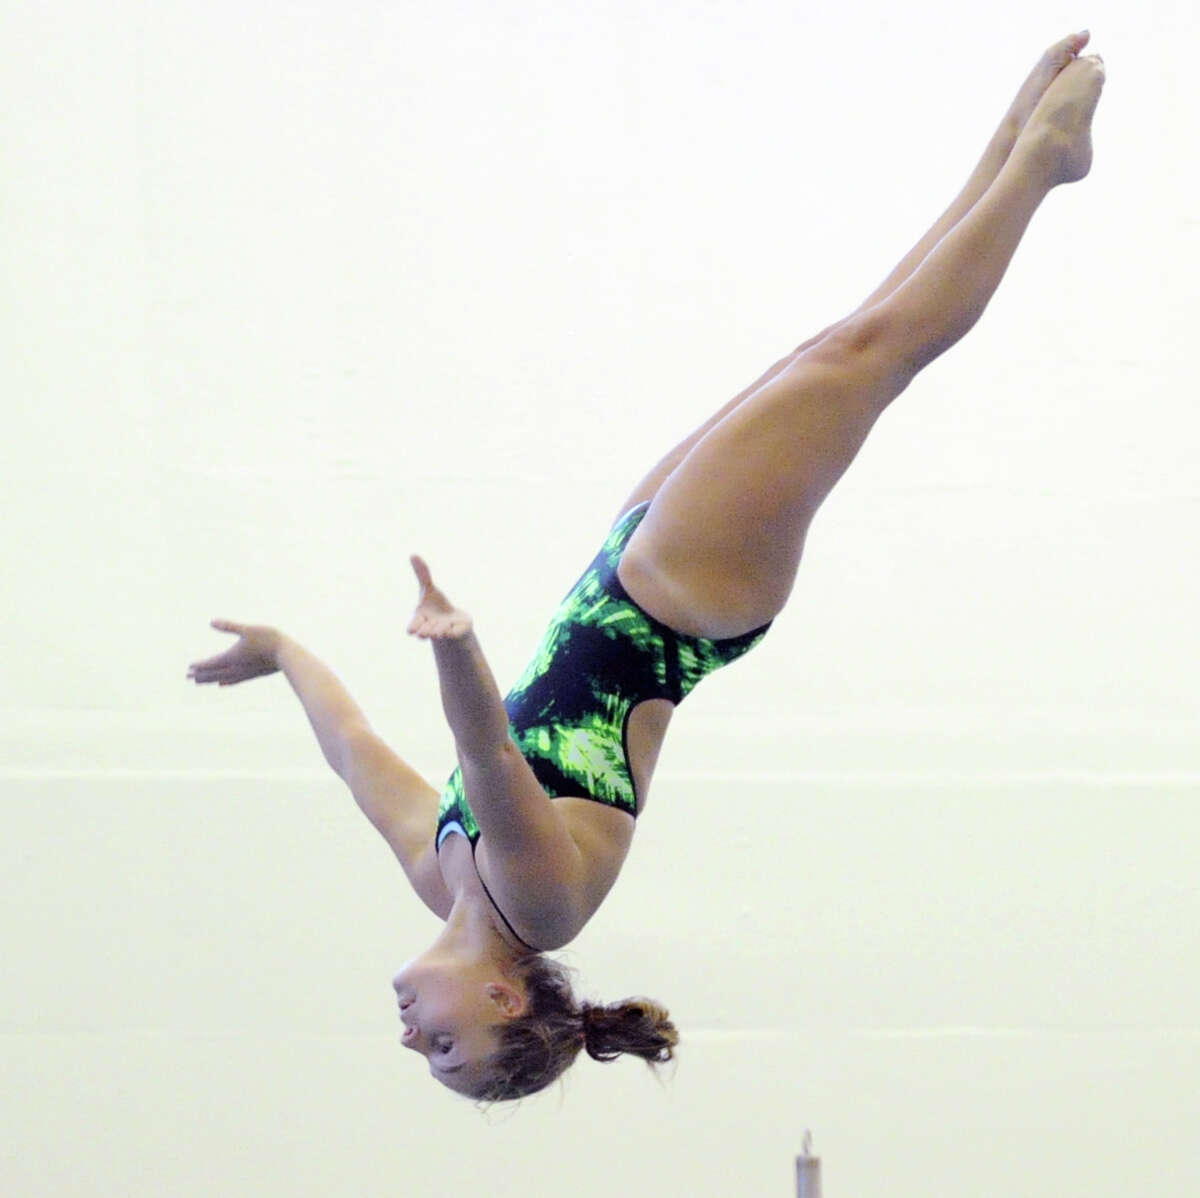 Elizabeth Fitzpatrick of Greenwich Academy competes in the diving during the girls high school swimming meet between Greenwich Academy and Convent of the Sacred Heart at the Brunswick School in Greenwich, Conn., Wednesday, Feb. 4, 2015.